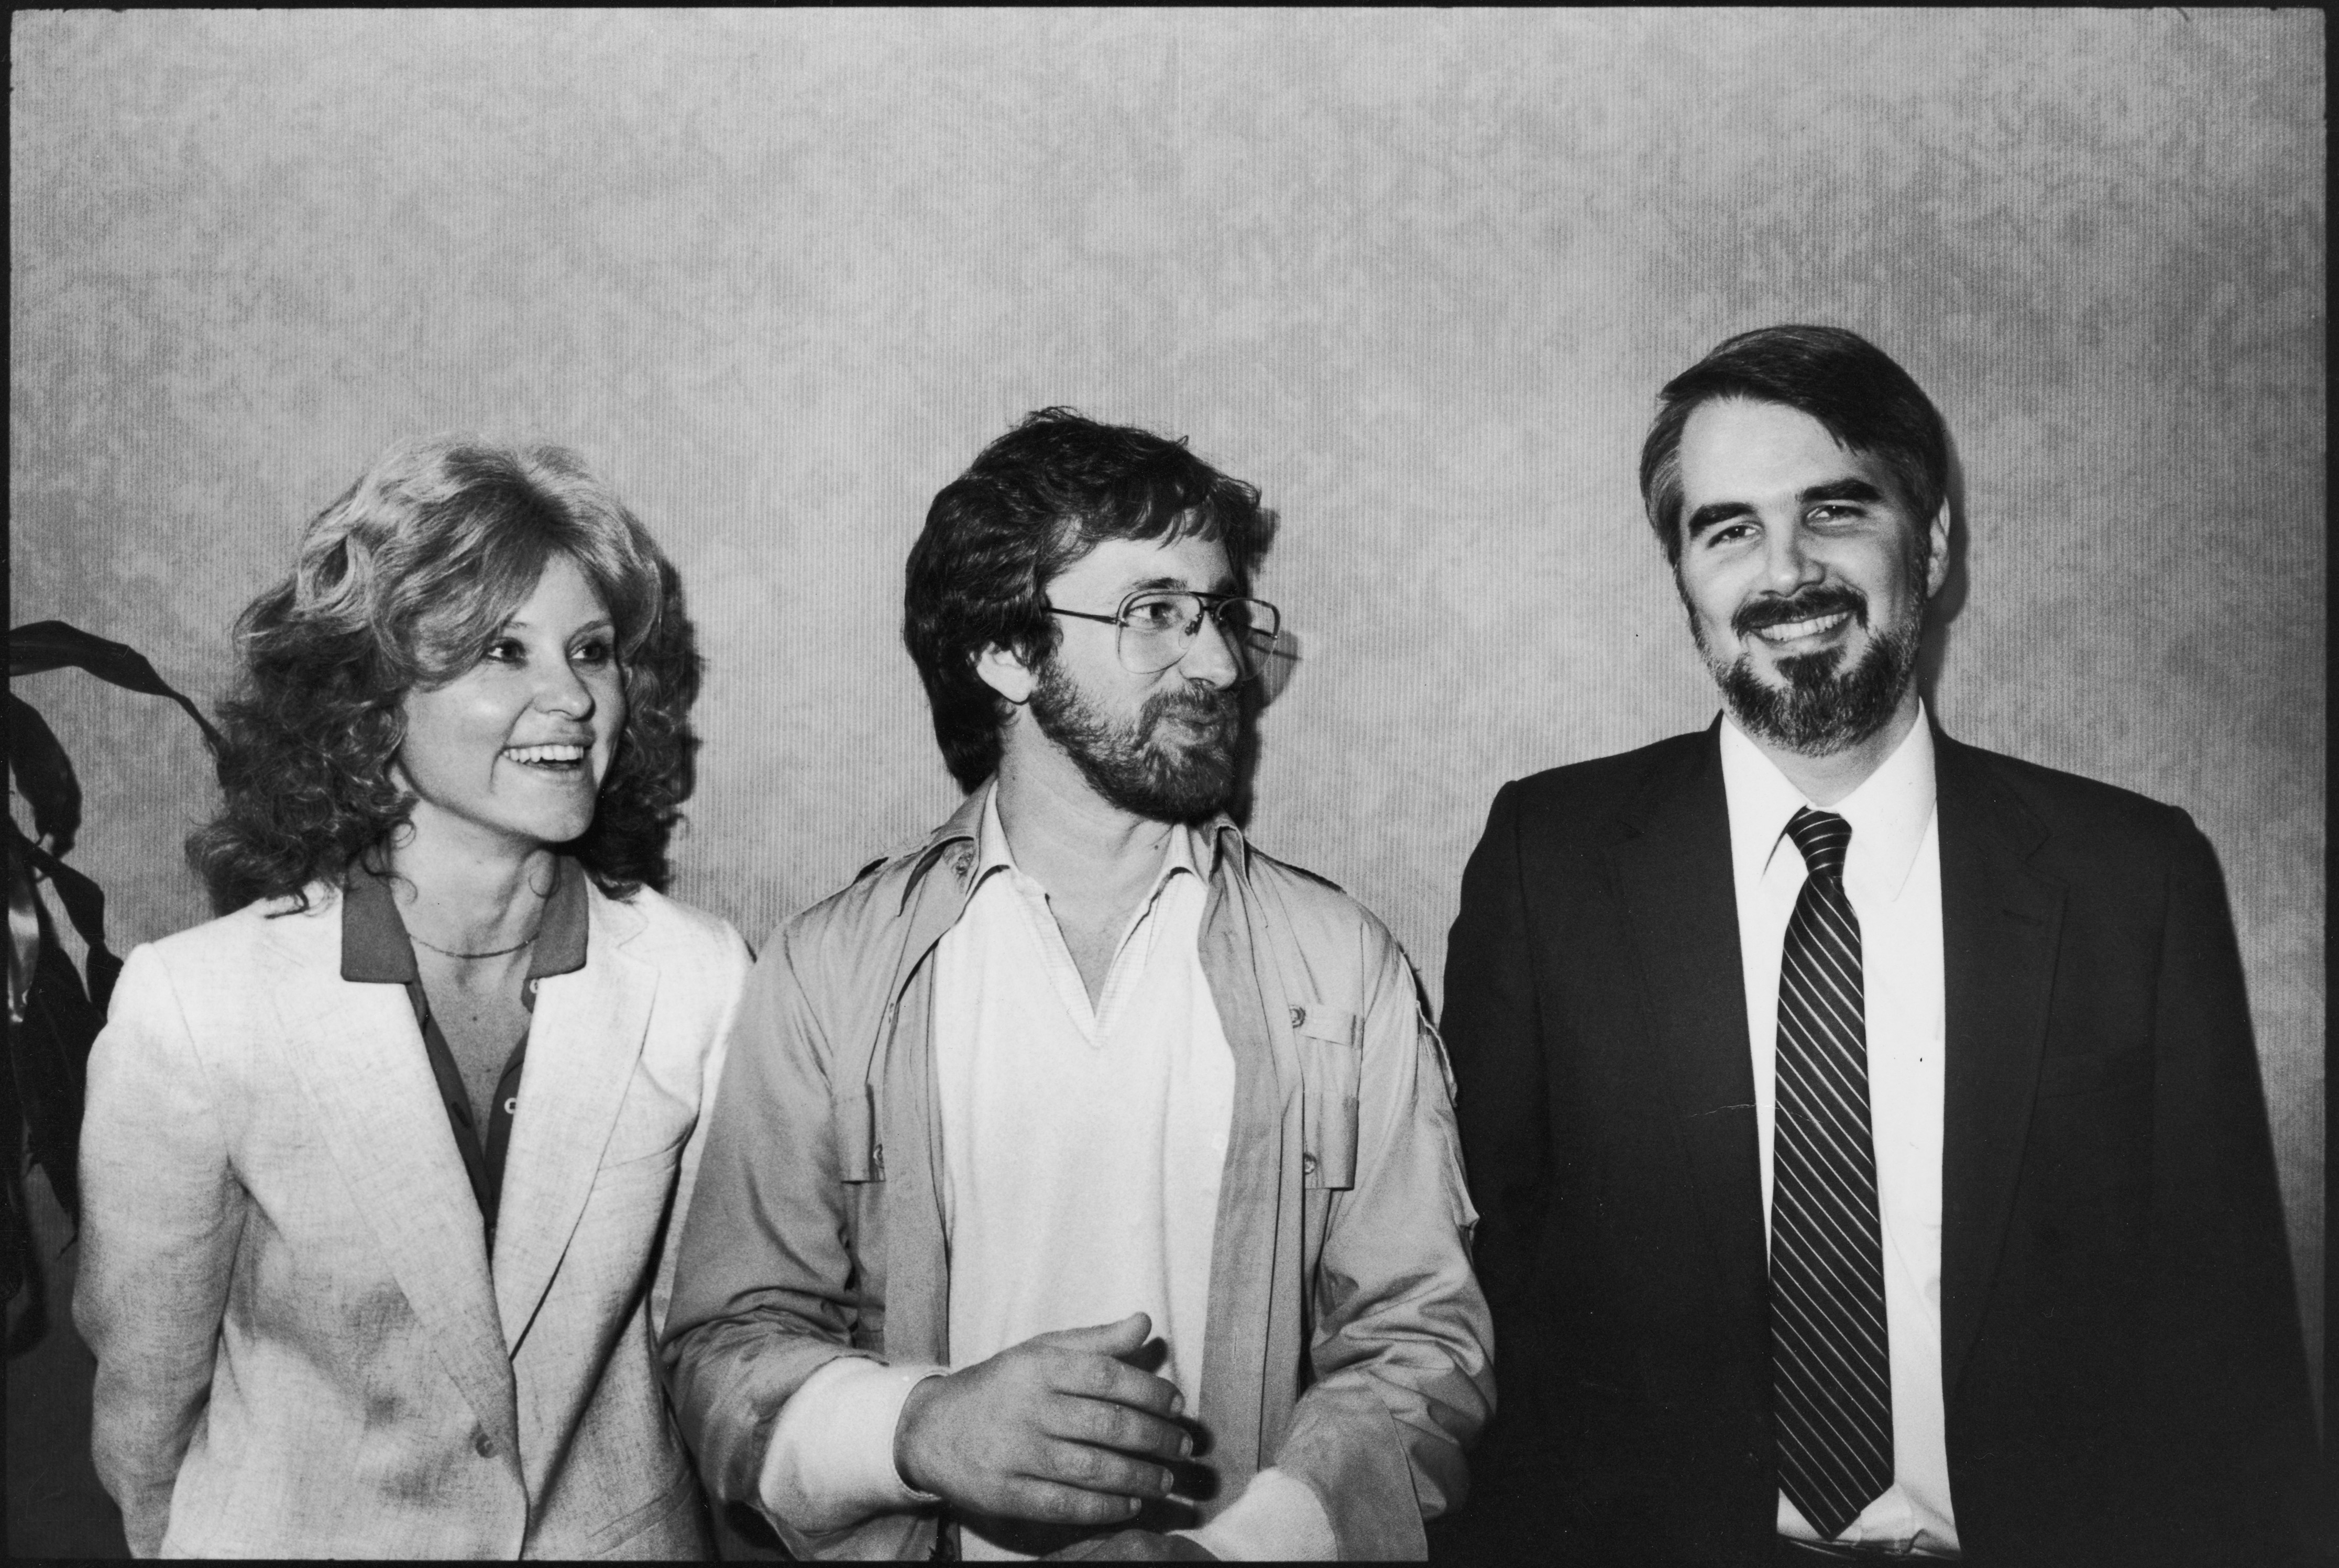 TIME writer Martha Smilgis, Associate Editor Richard Corliss (R) wtih film director Steven Spielberg. (Ted Thai—The LIFE Picture Collection/Getty Images)